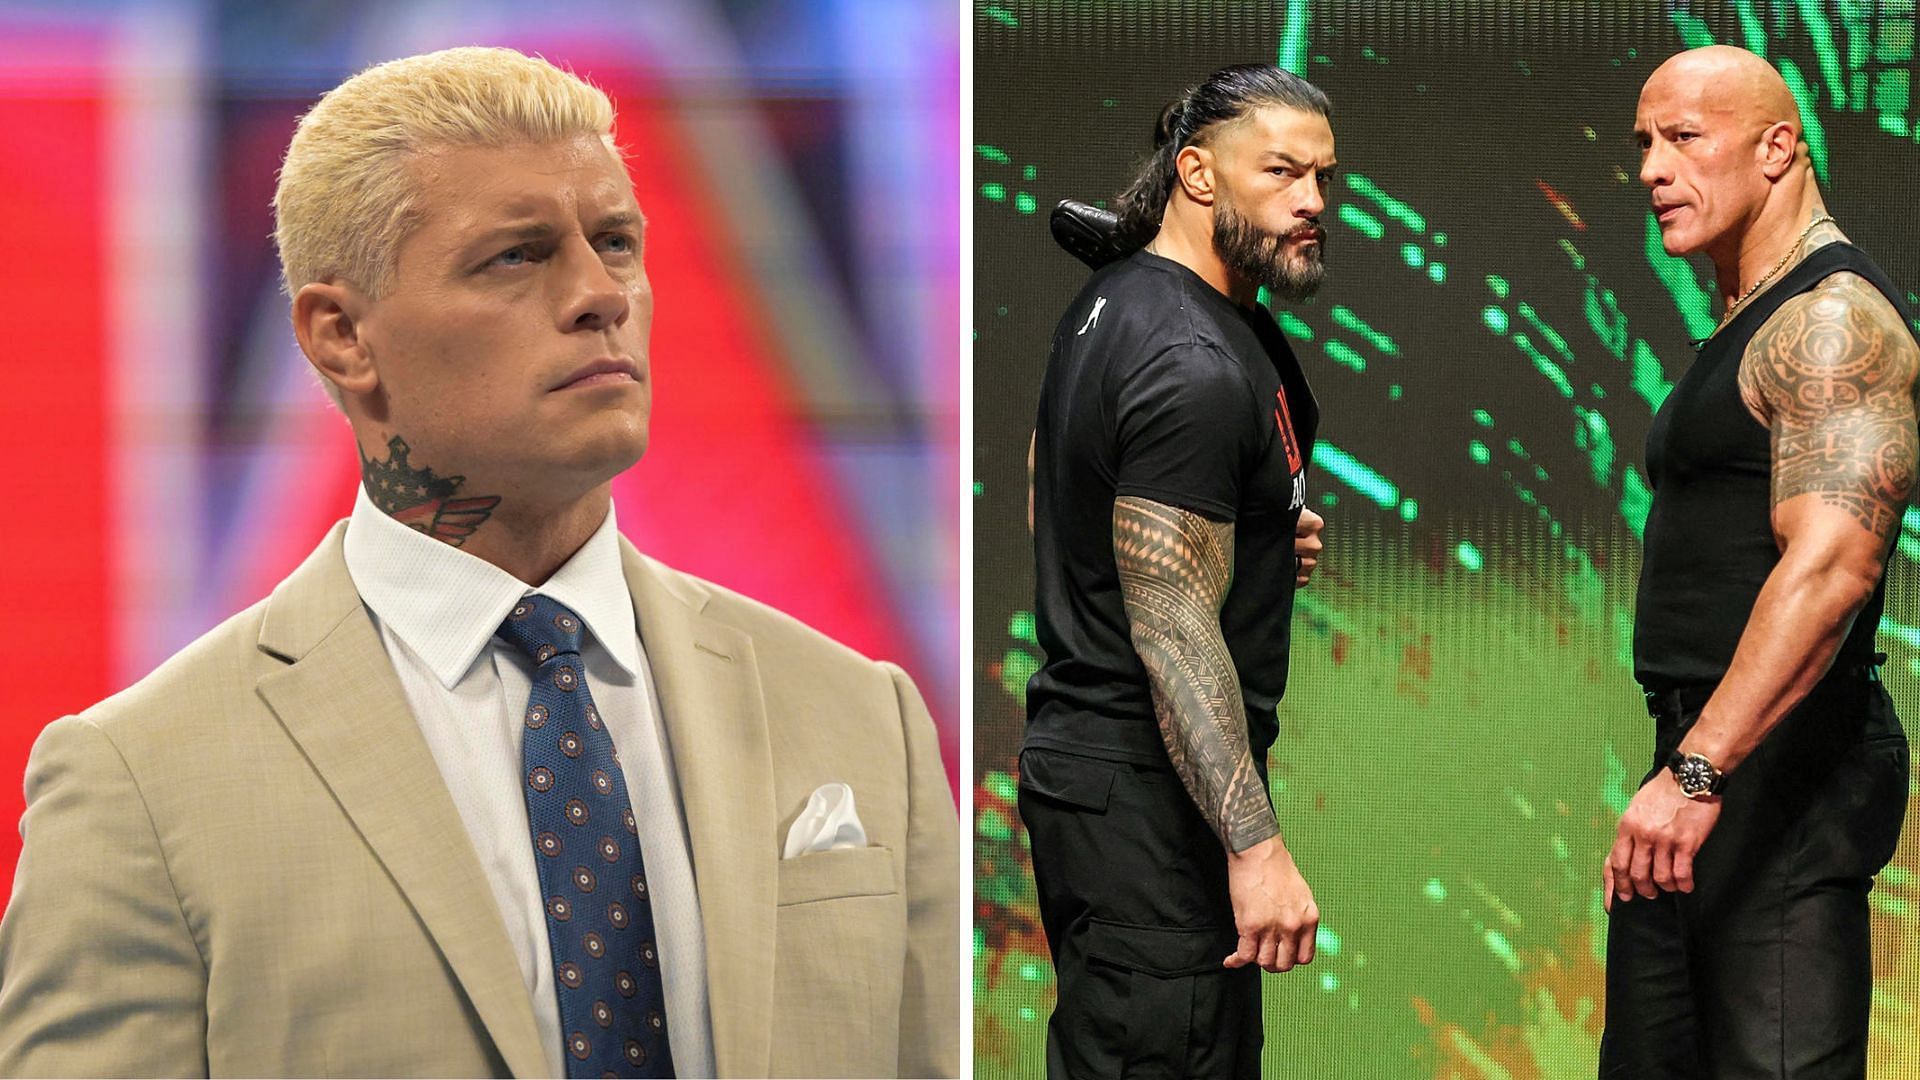 Cody Rhodes on the left, The Rock with Roman Reigns on the right [Image credits: wwe.com]